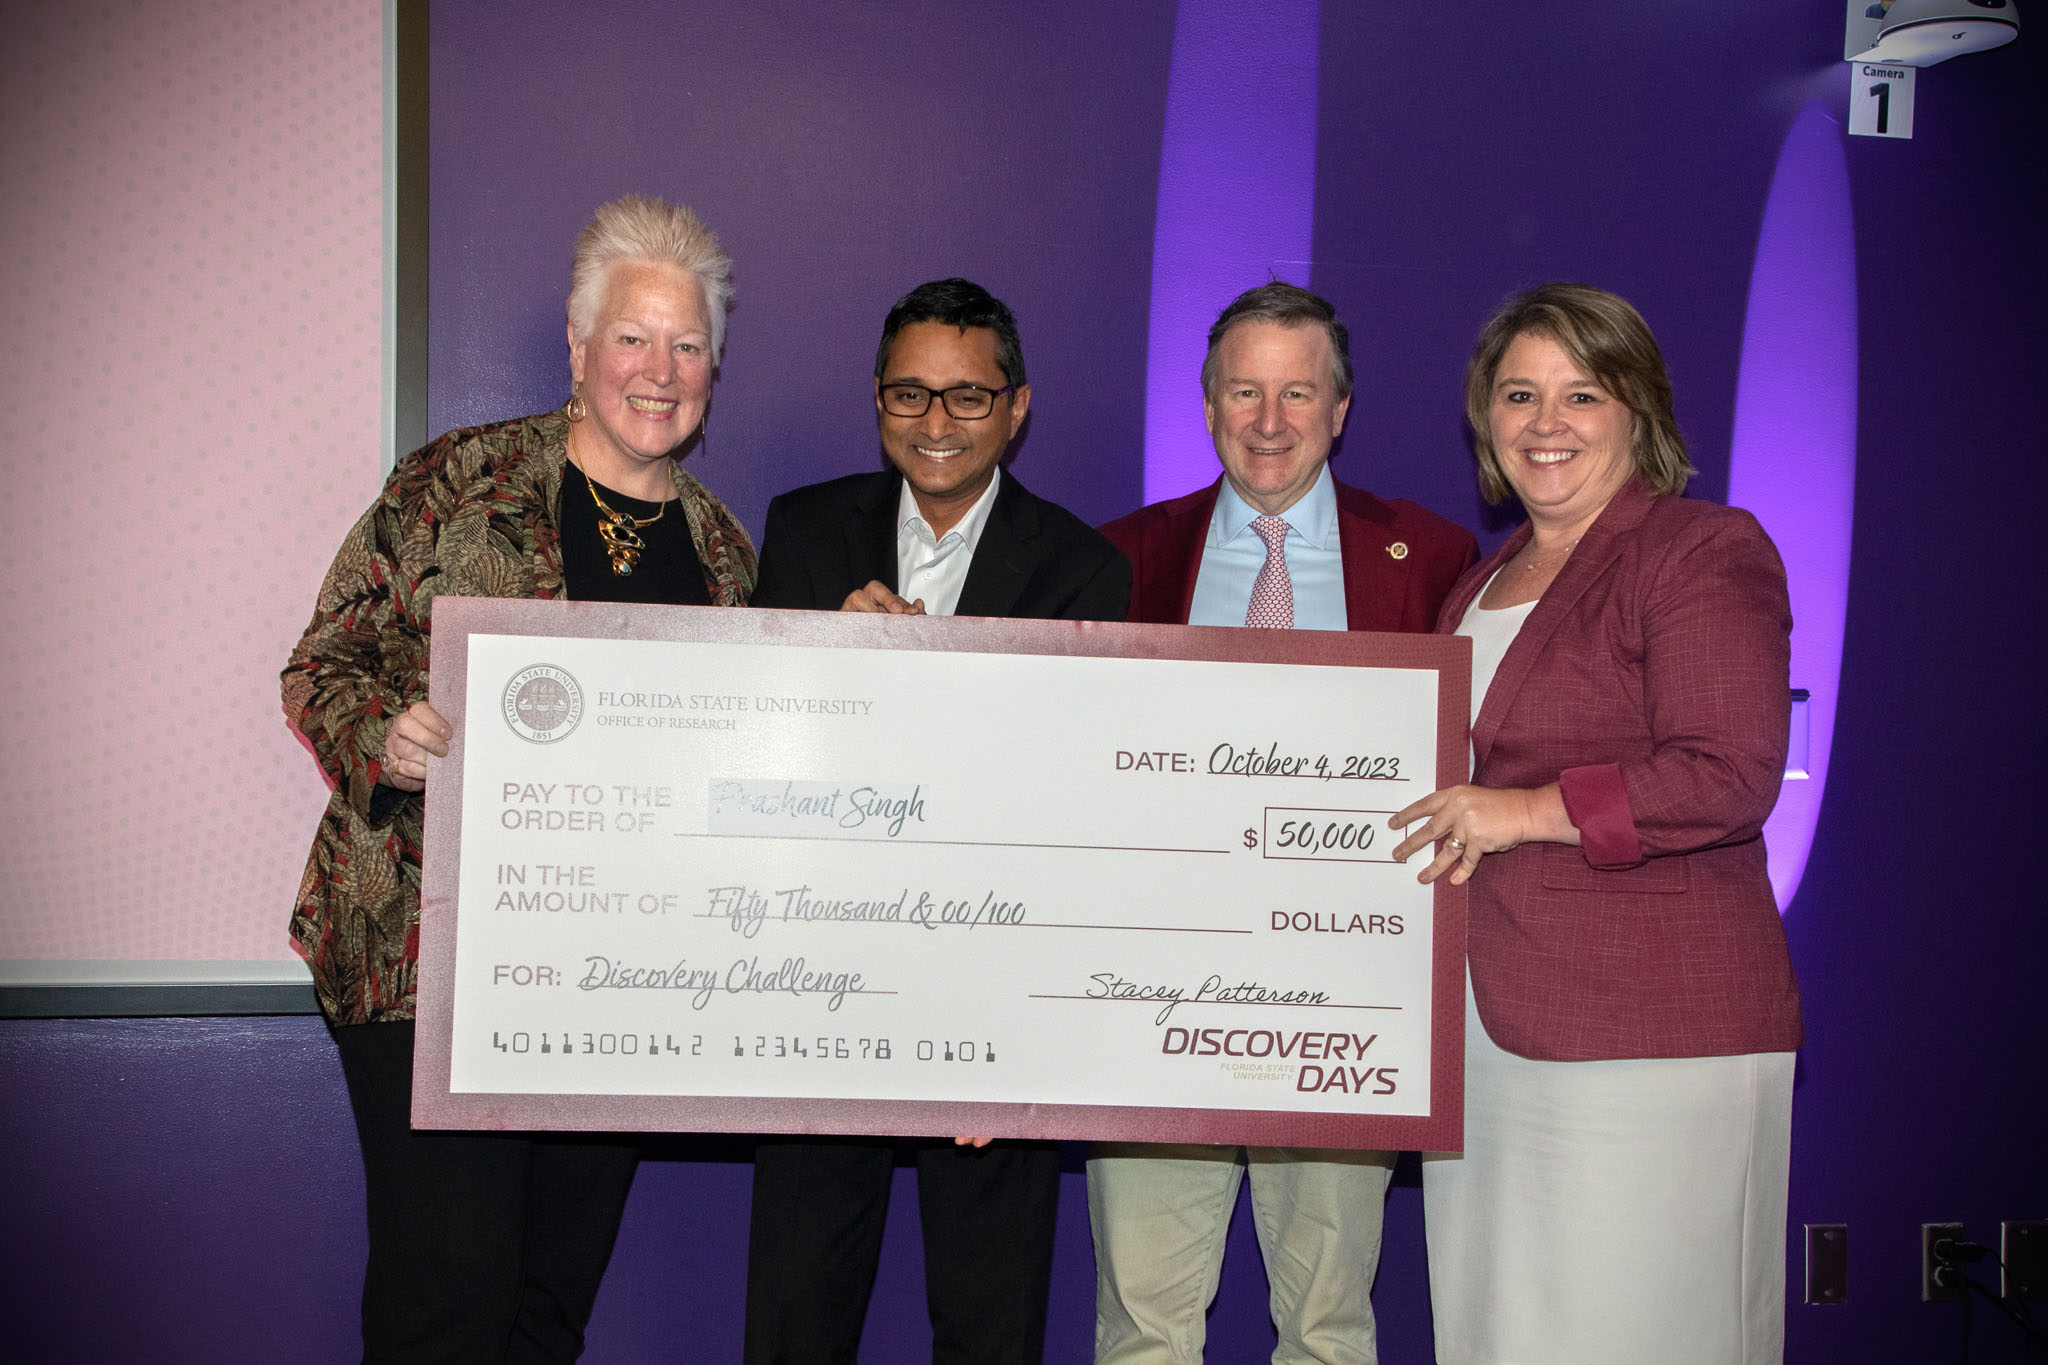 Prashant Singh took the top prize of $50,000 for a project aimed at improving food safety at the FSU Discovery Challenge event on Wednesday, Oct. 4, 2023. (FSU Photography Services)